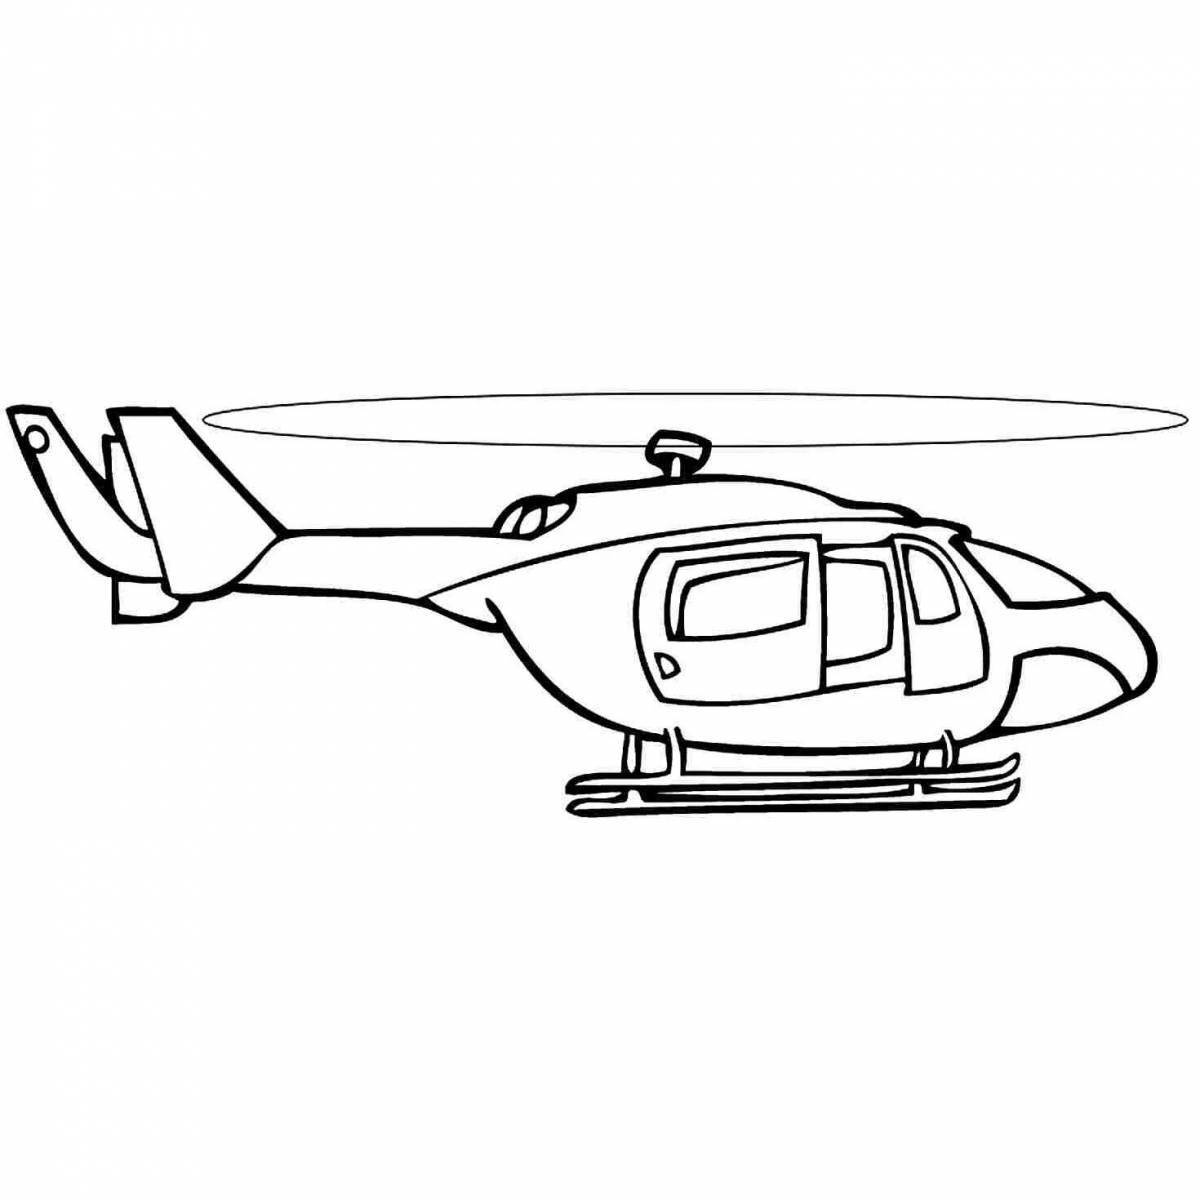 Fun coloring book police helicopter for kids